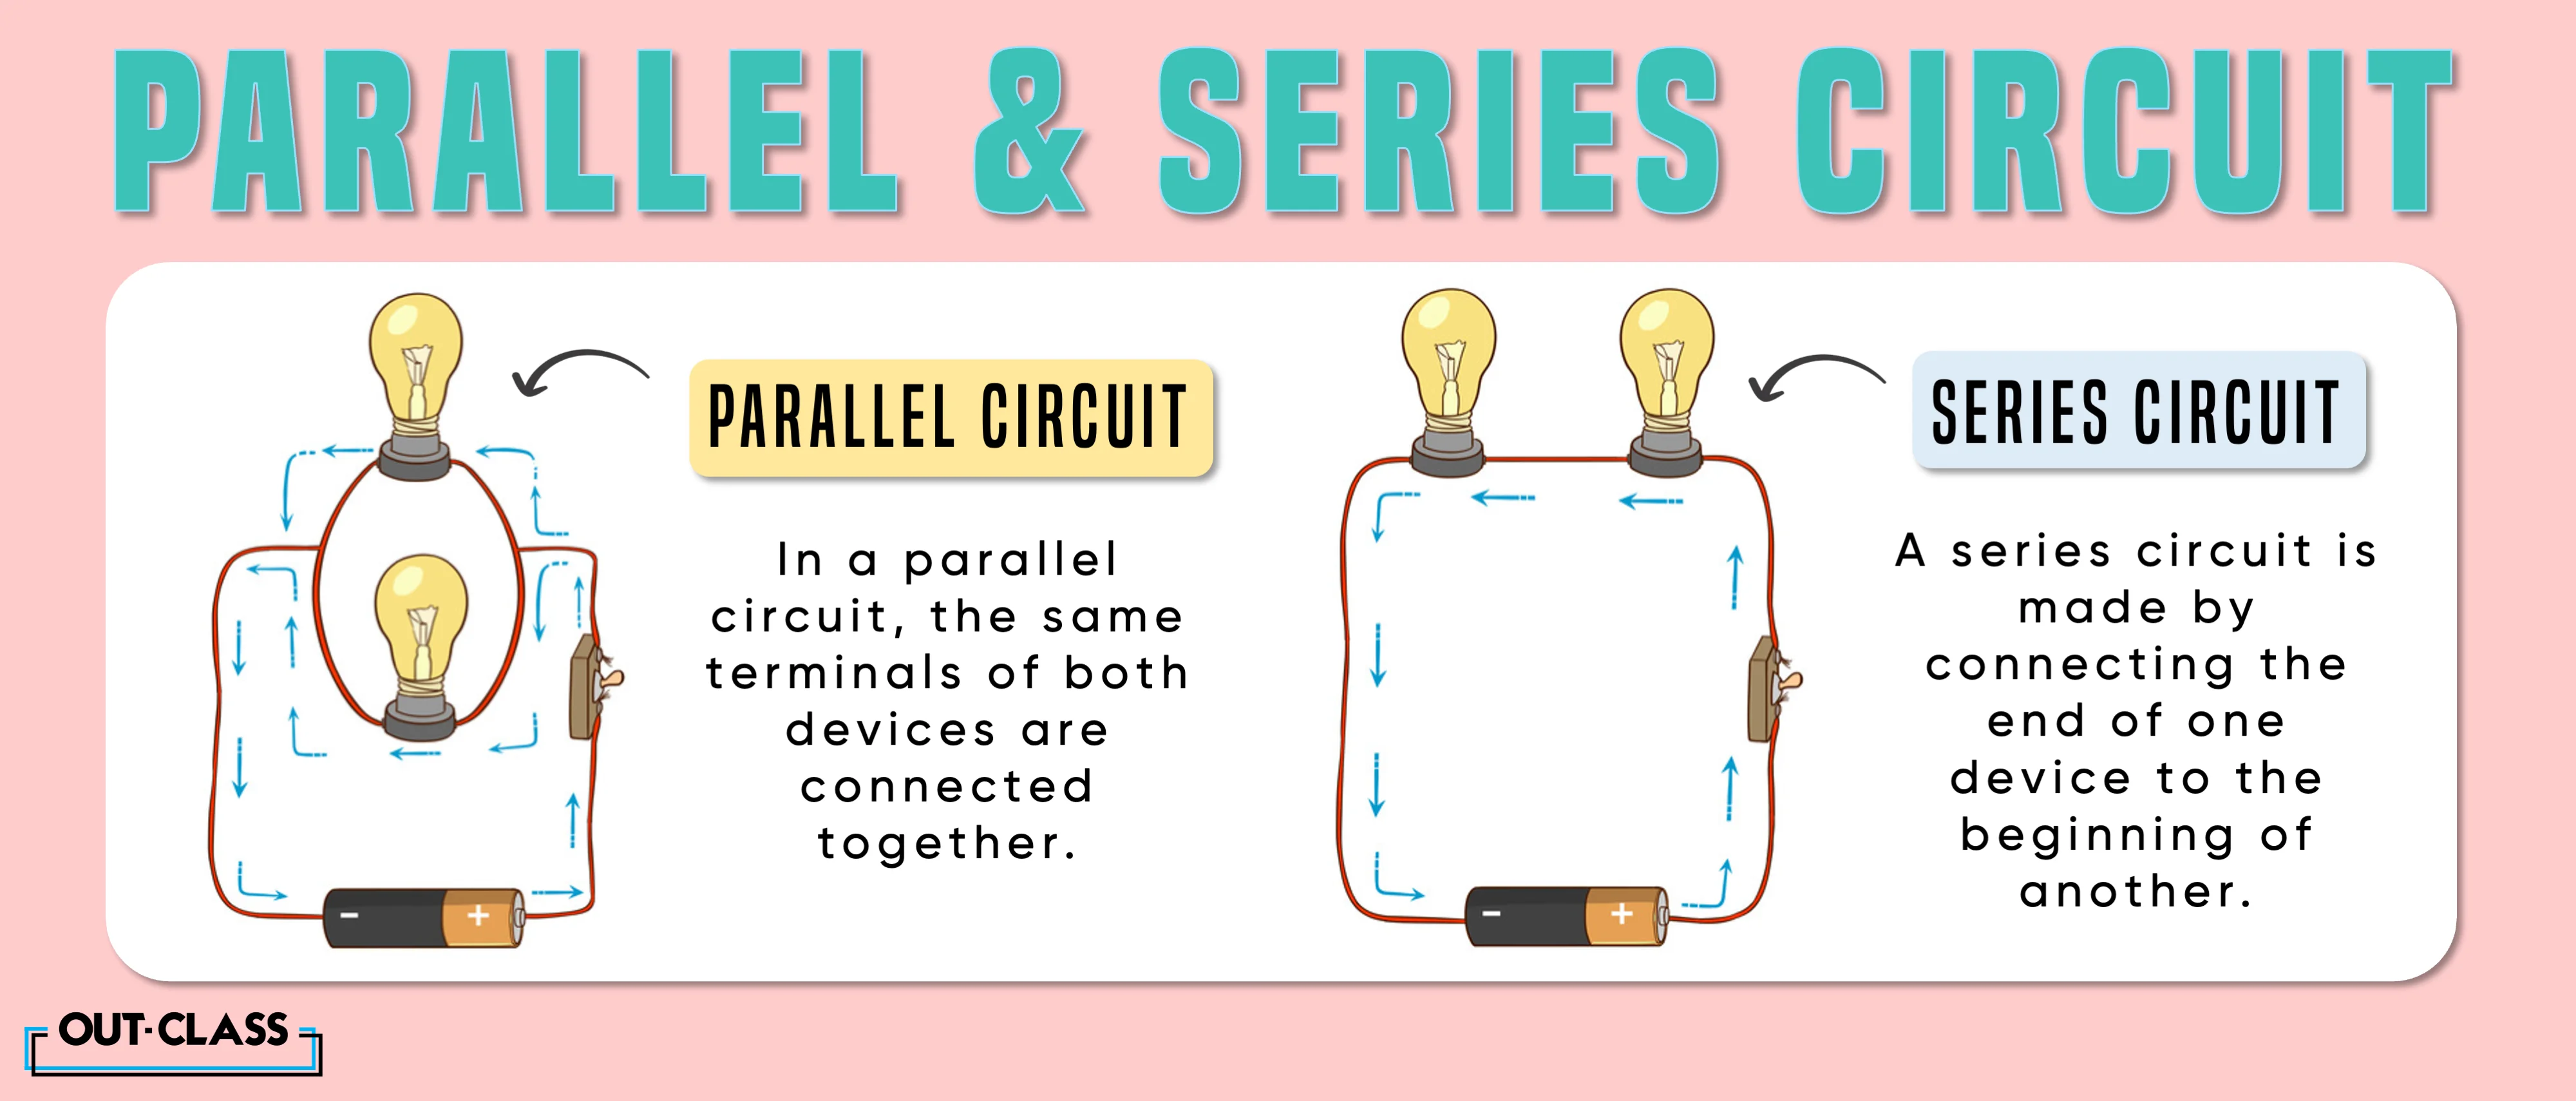 It shows the difference between parallel and series circuit with proper examples of how to solve parallel and series circuits and the ohm's law that comes in O Level Physics.